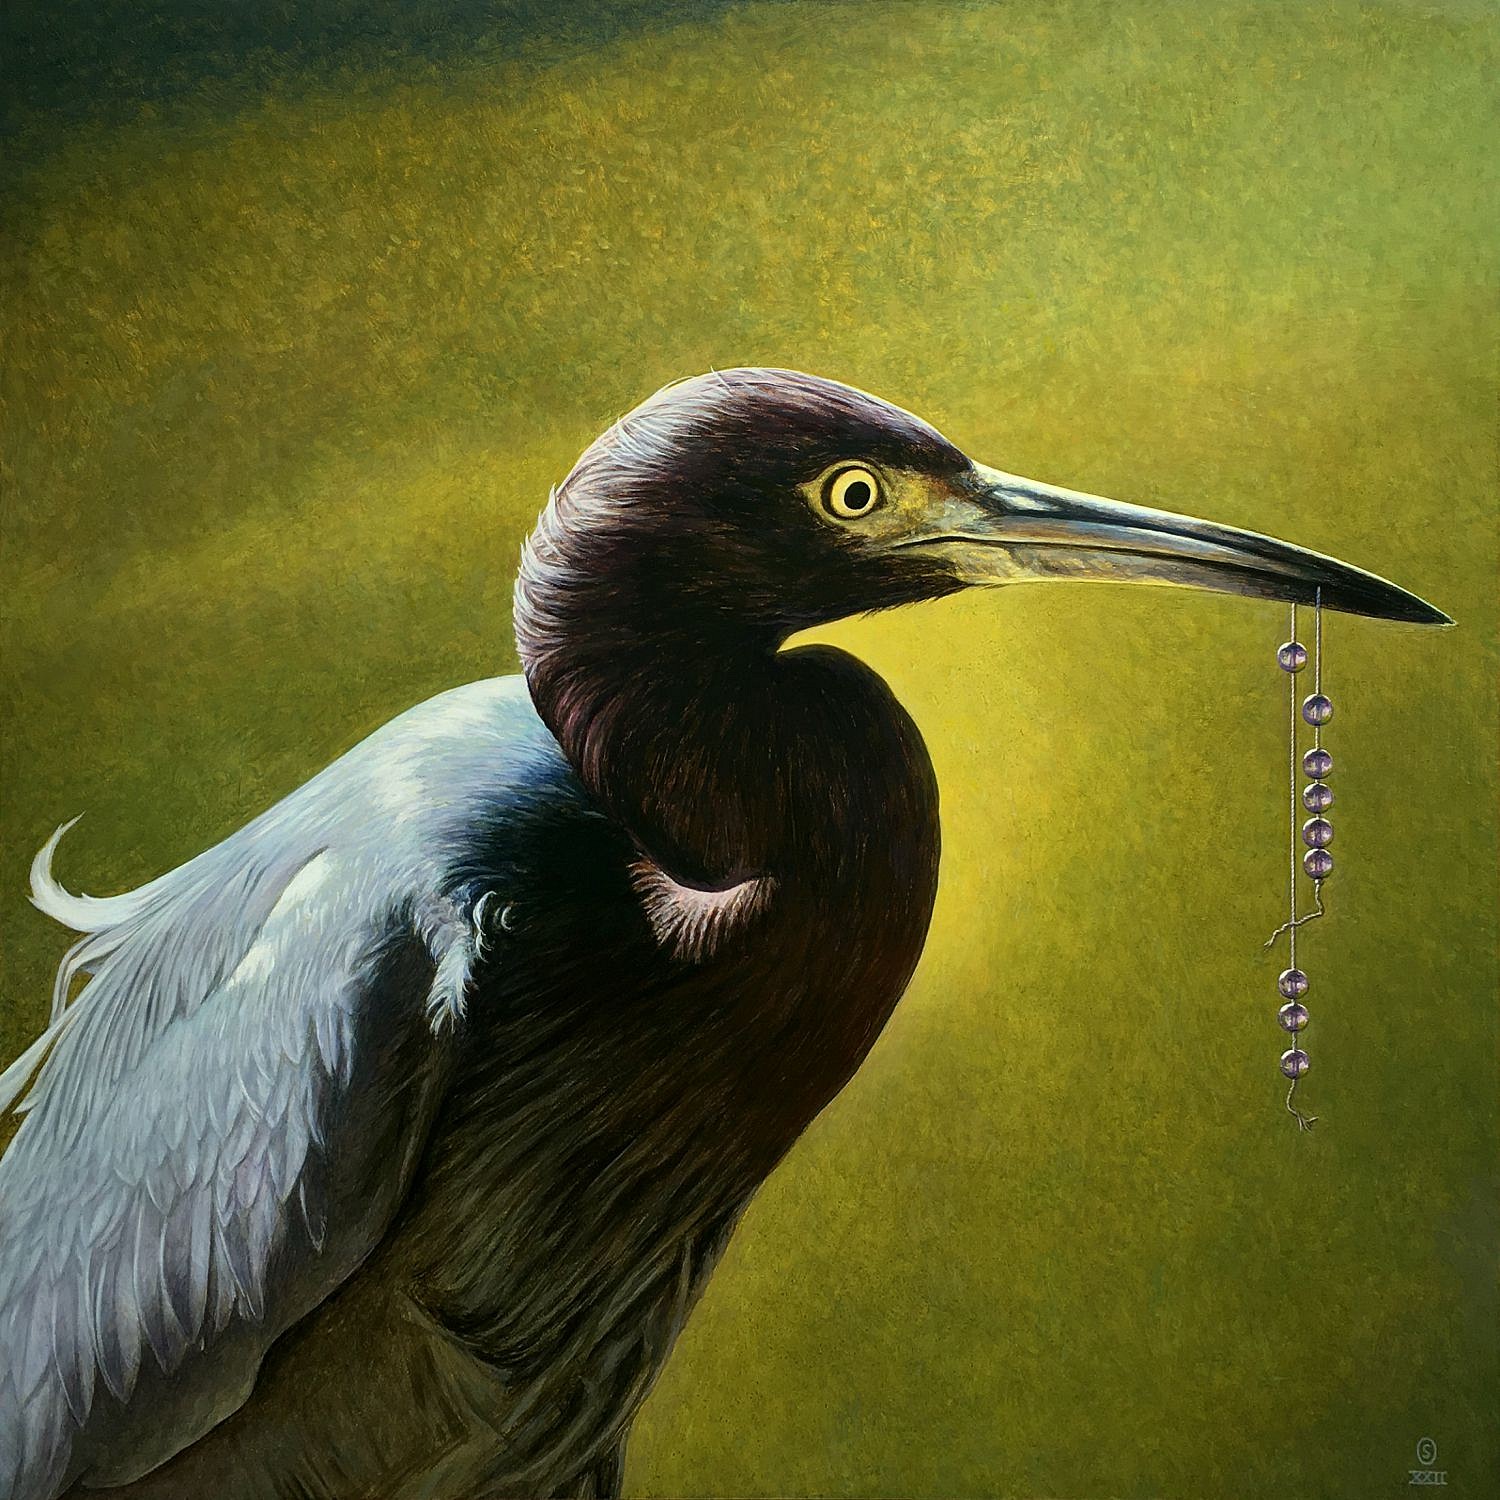 PRESS RELEASE: Intimate Animal and Bird Paintings, Feb 25 - Apr 10, 2022